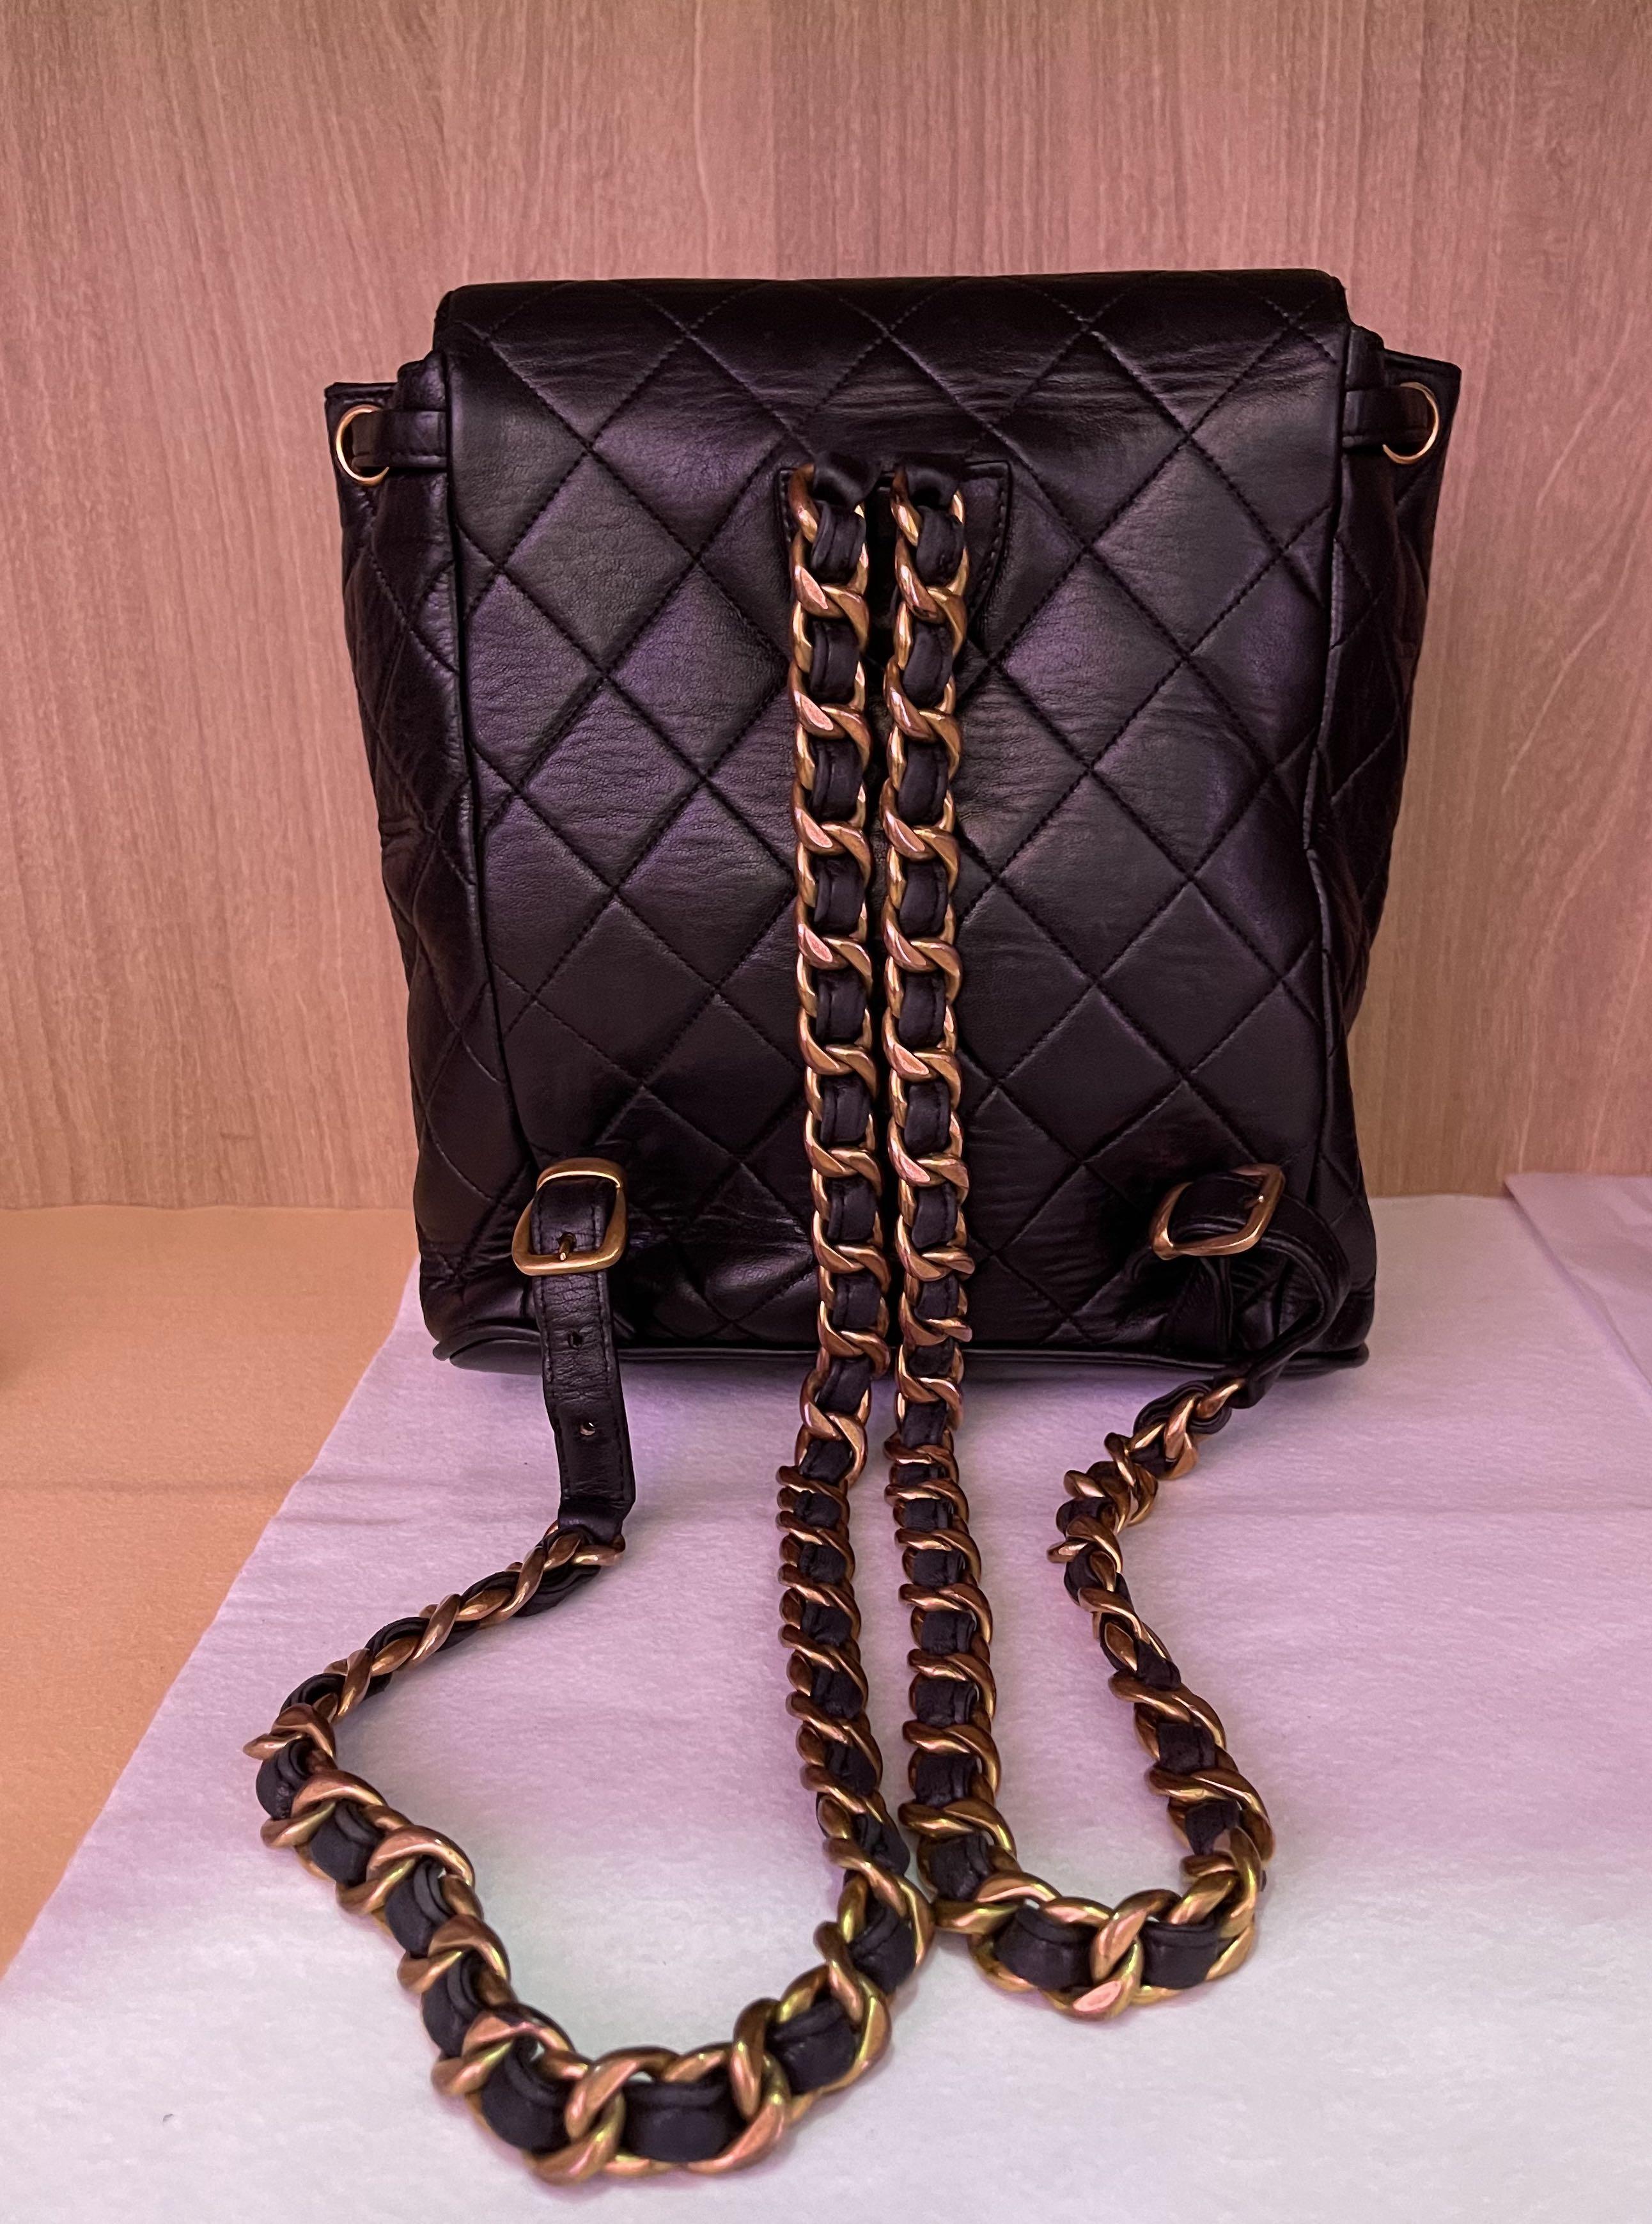 Chanel Black Quilted Glazed Calfskin Mountain Backpack